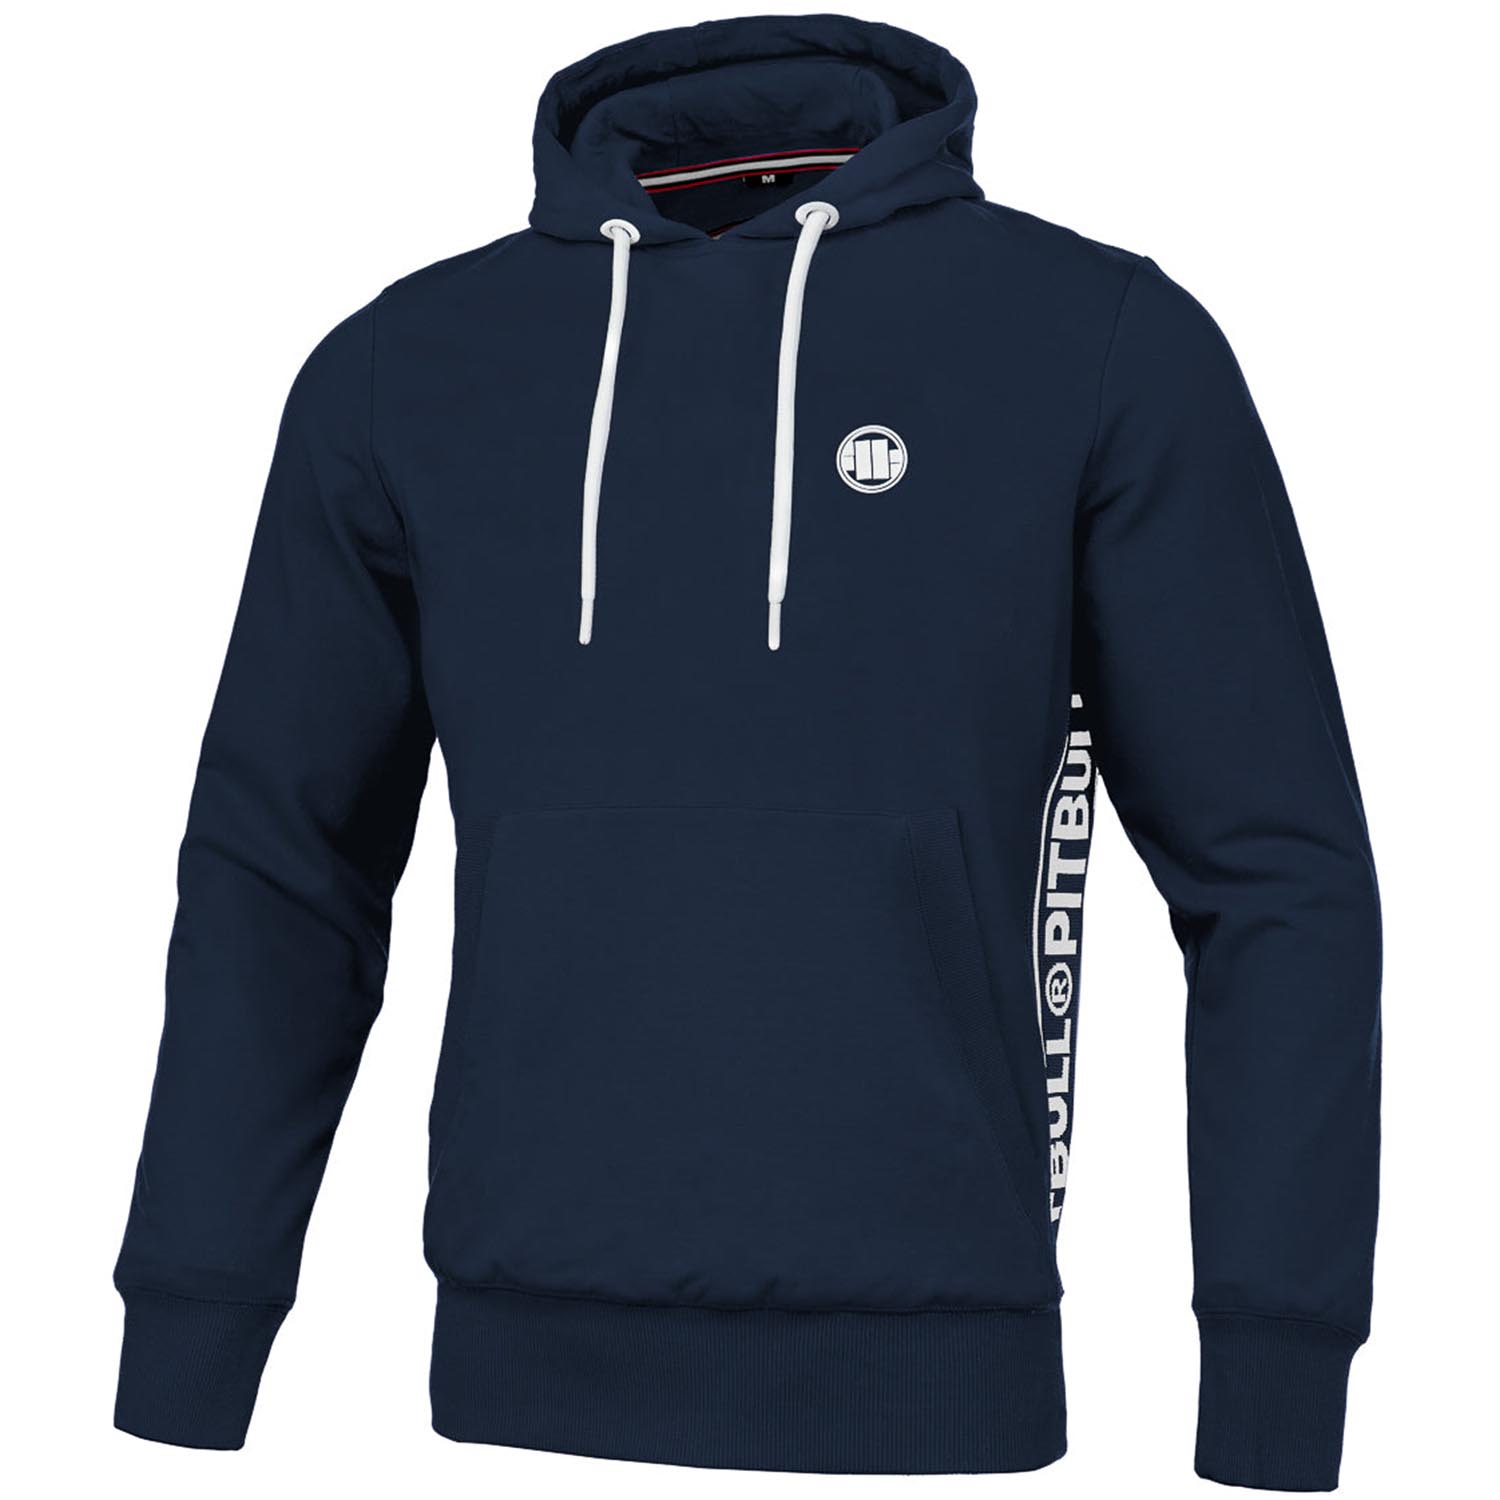 Pit Bull West Coast Hoody, Hinson French Terry, navy